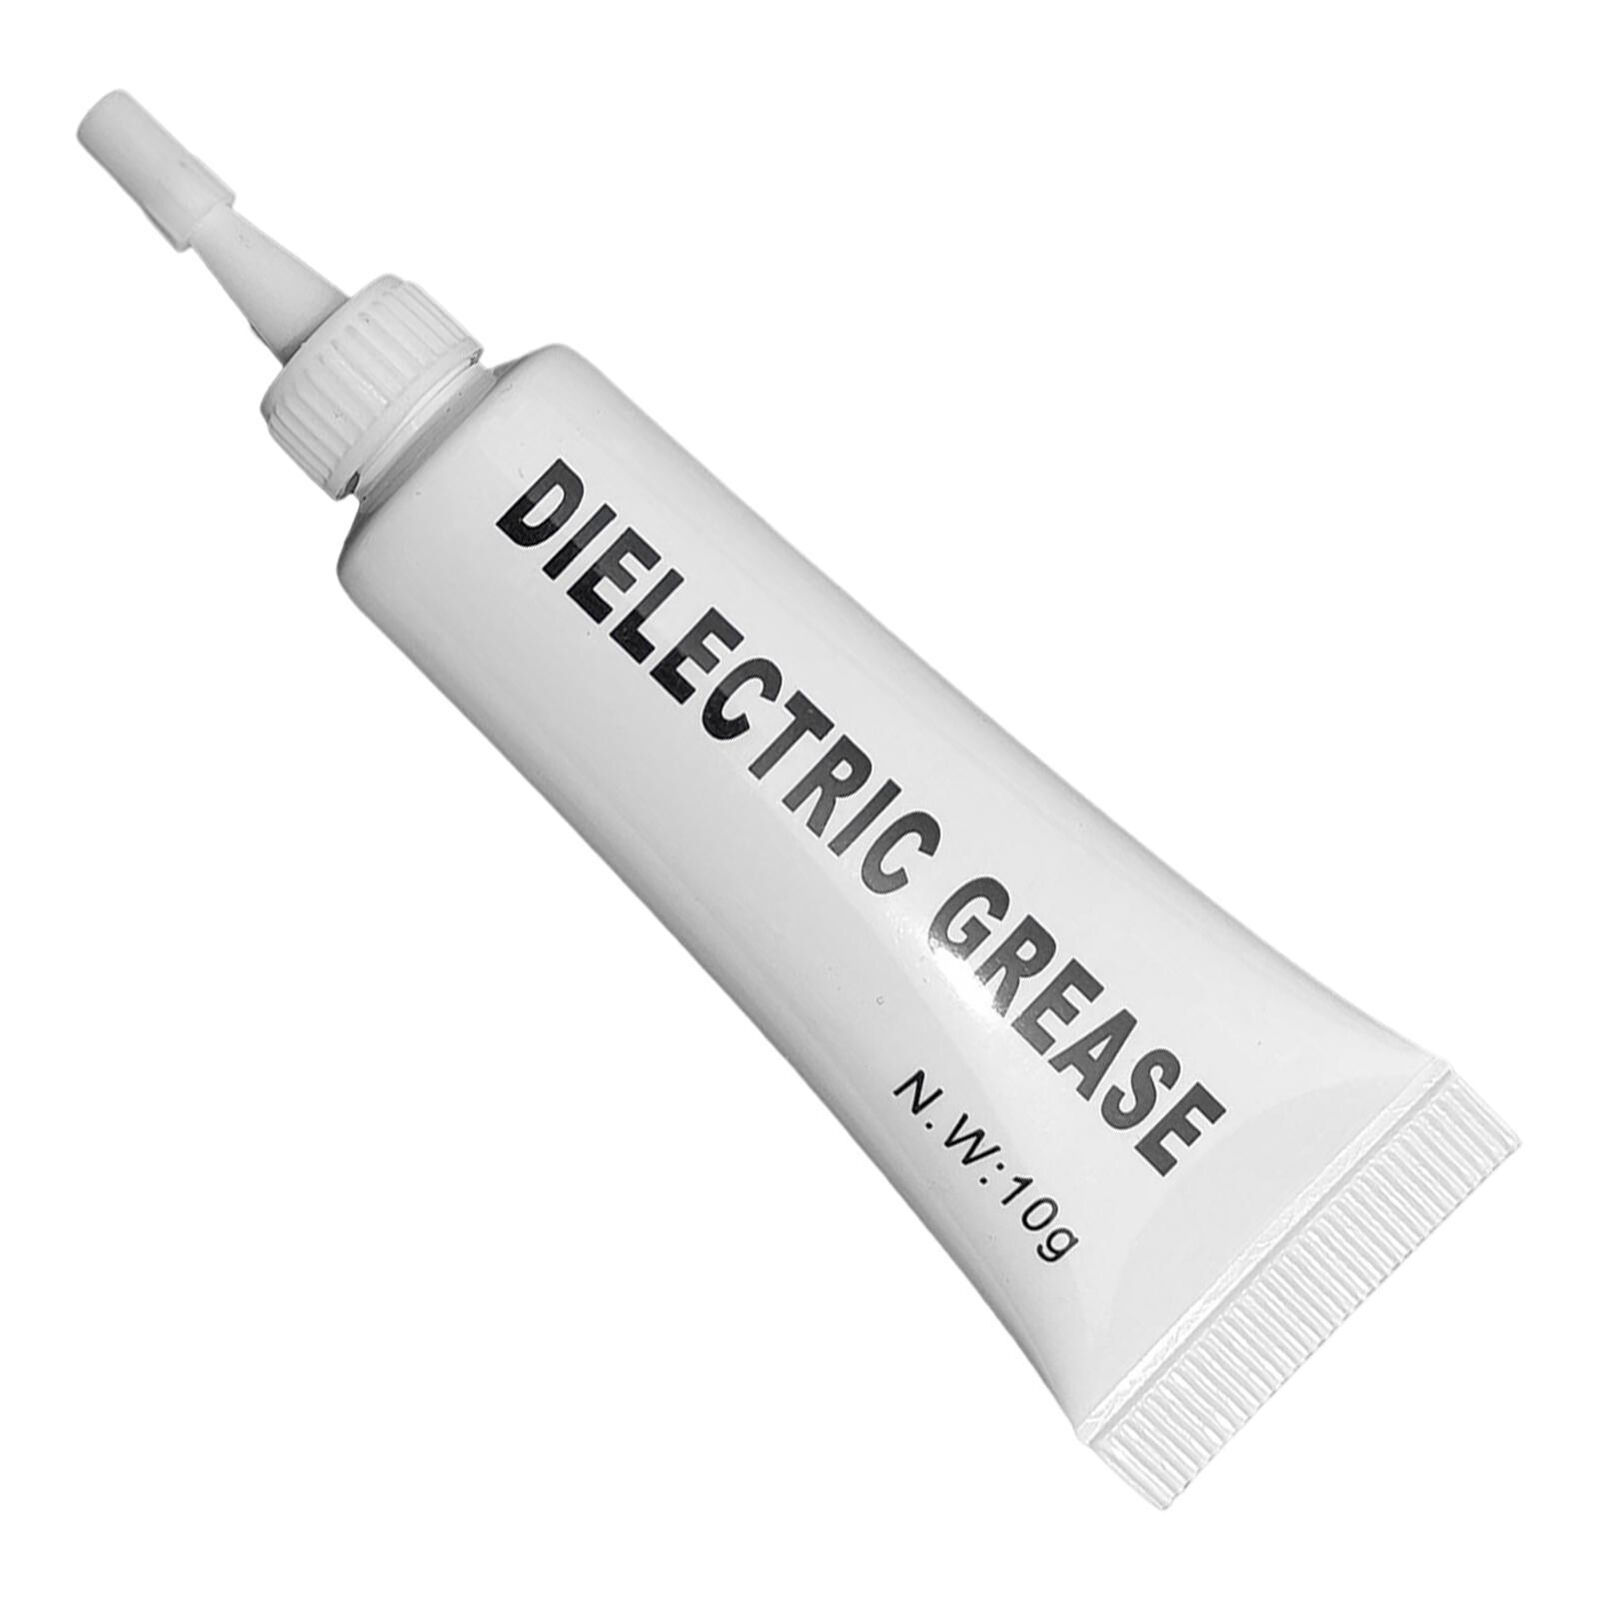 5pcs Dielectric Grease Silicone Paste Waterproof Grease Electrical Connection